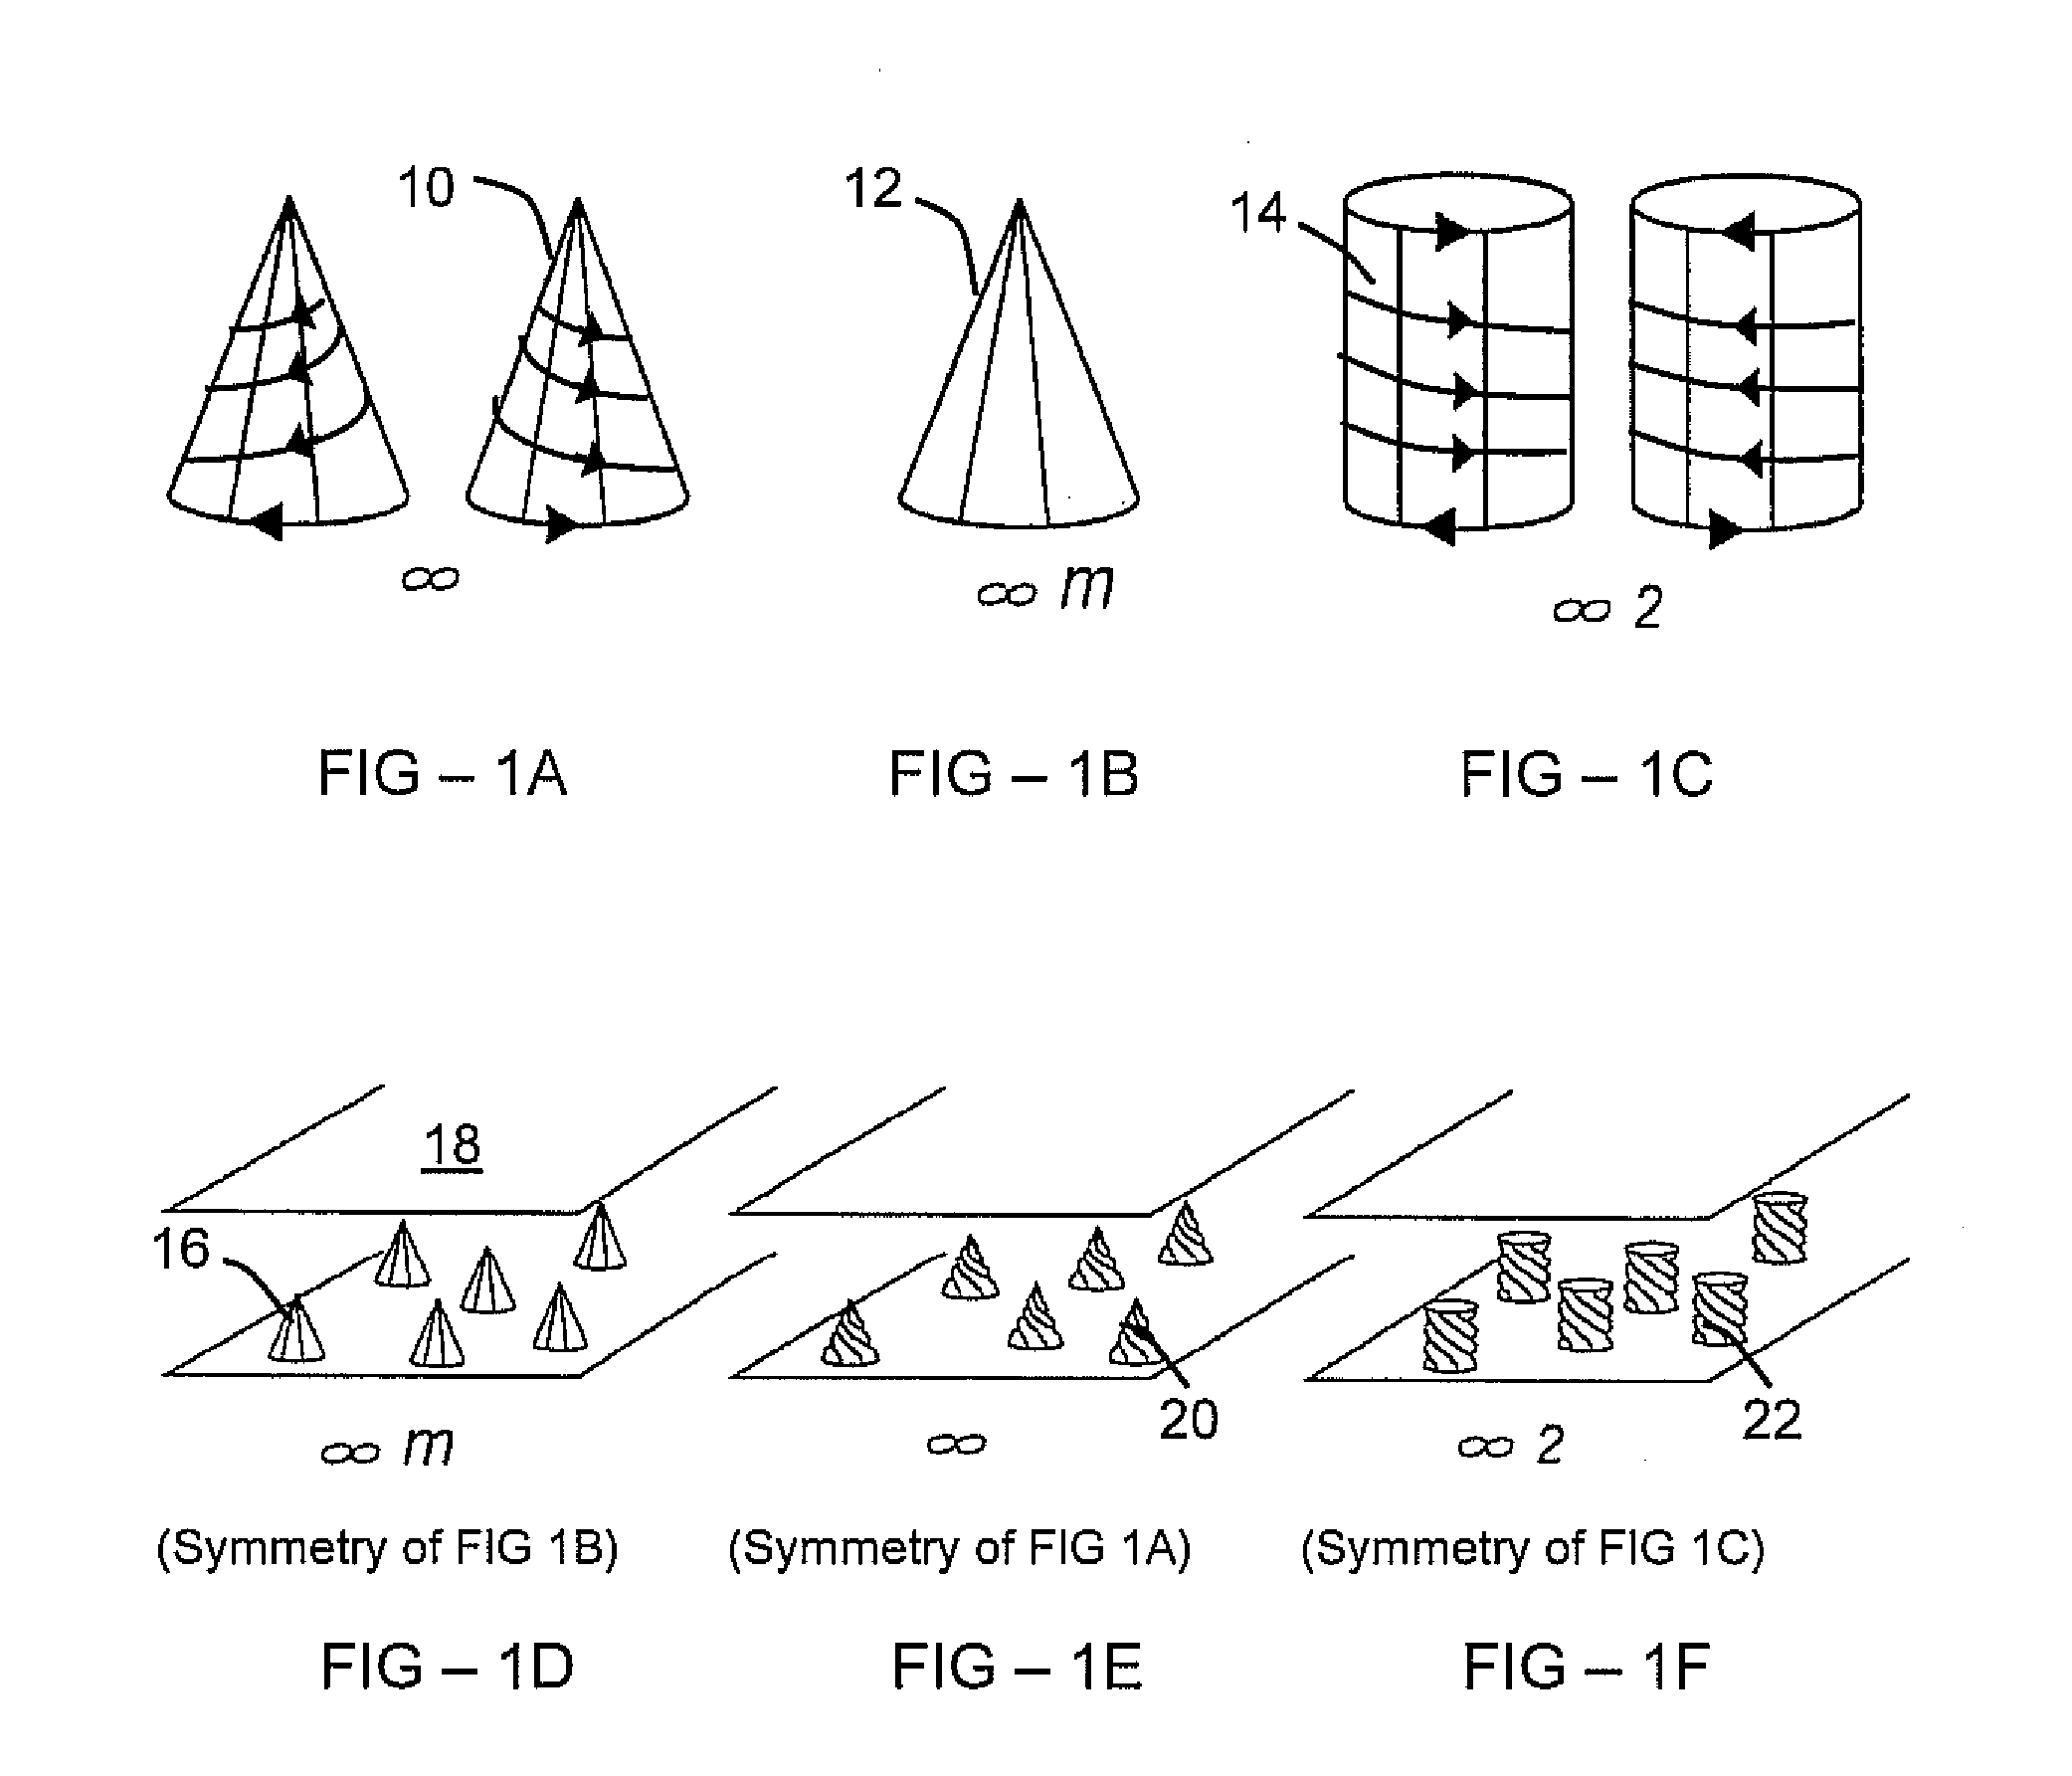 Piezoelectric materials based on flexoelectric charge separation and their fabrication